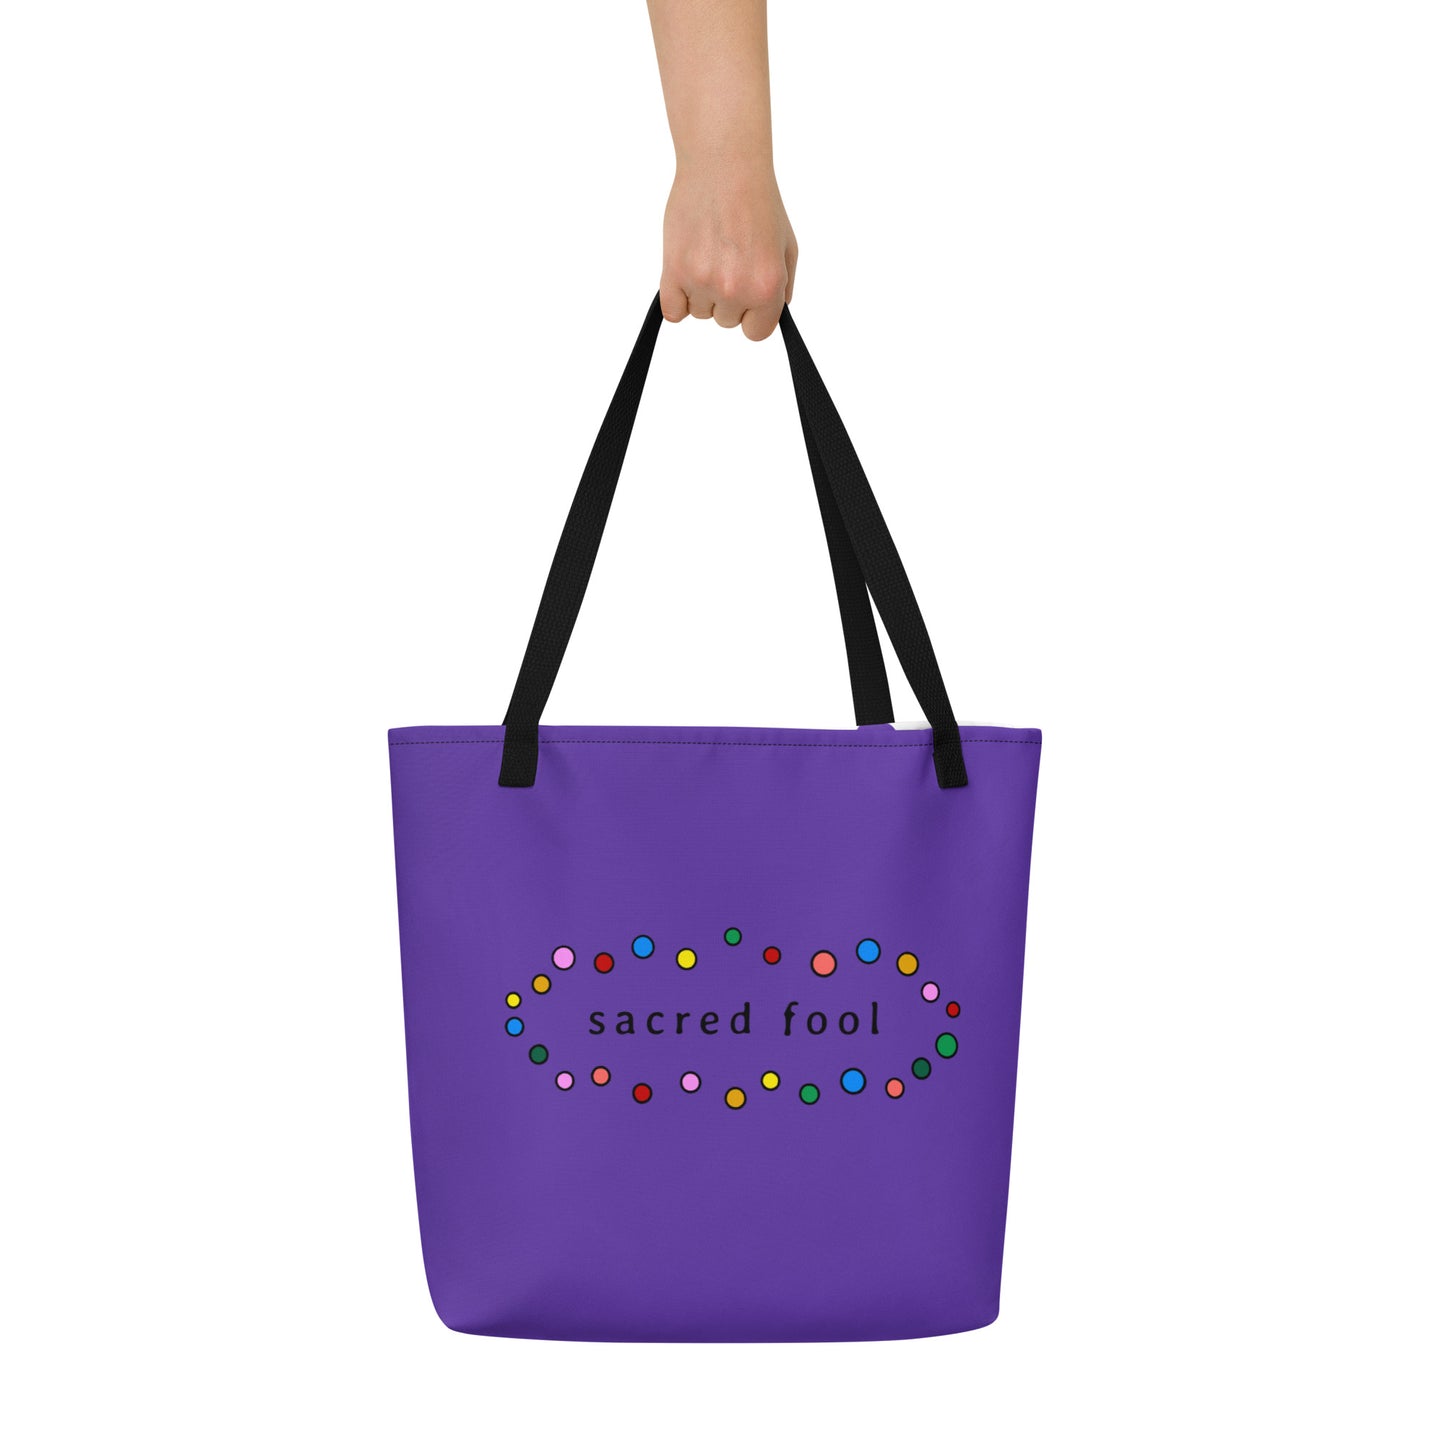 back view of purple shopping tote bag features the sacred fool logo in black surrounded by a waving encircling of polka bubbles in red, yellow, yellow ochre, neon salmon, grass green, evergreen, sky blue, and bubblegum pink outlined in black.